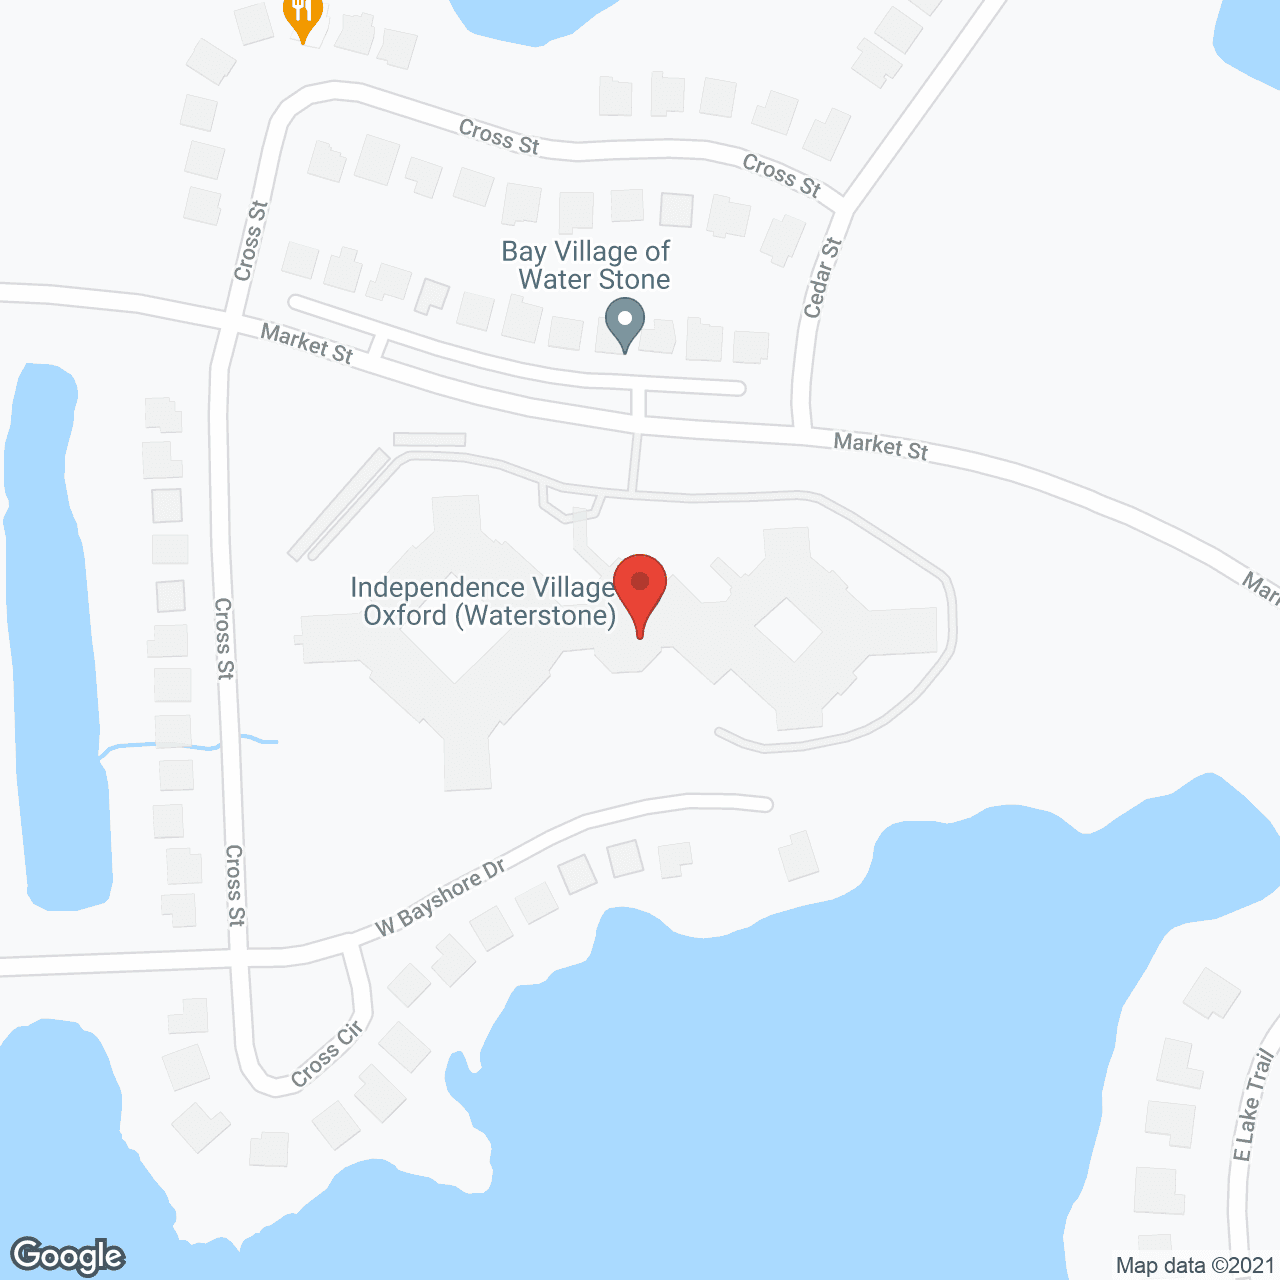 Independence Village of Oxford (Waterstone) in google map